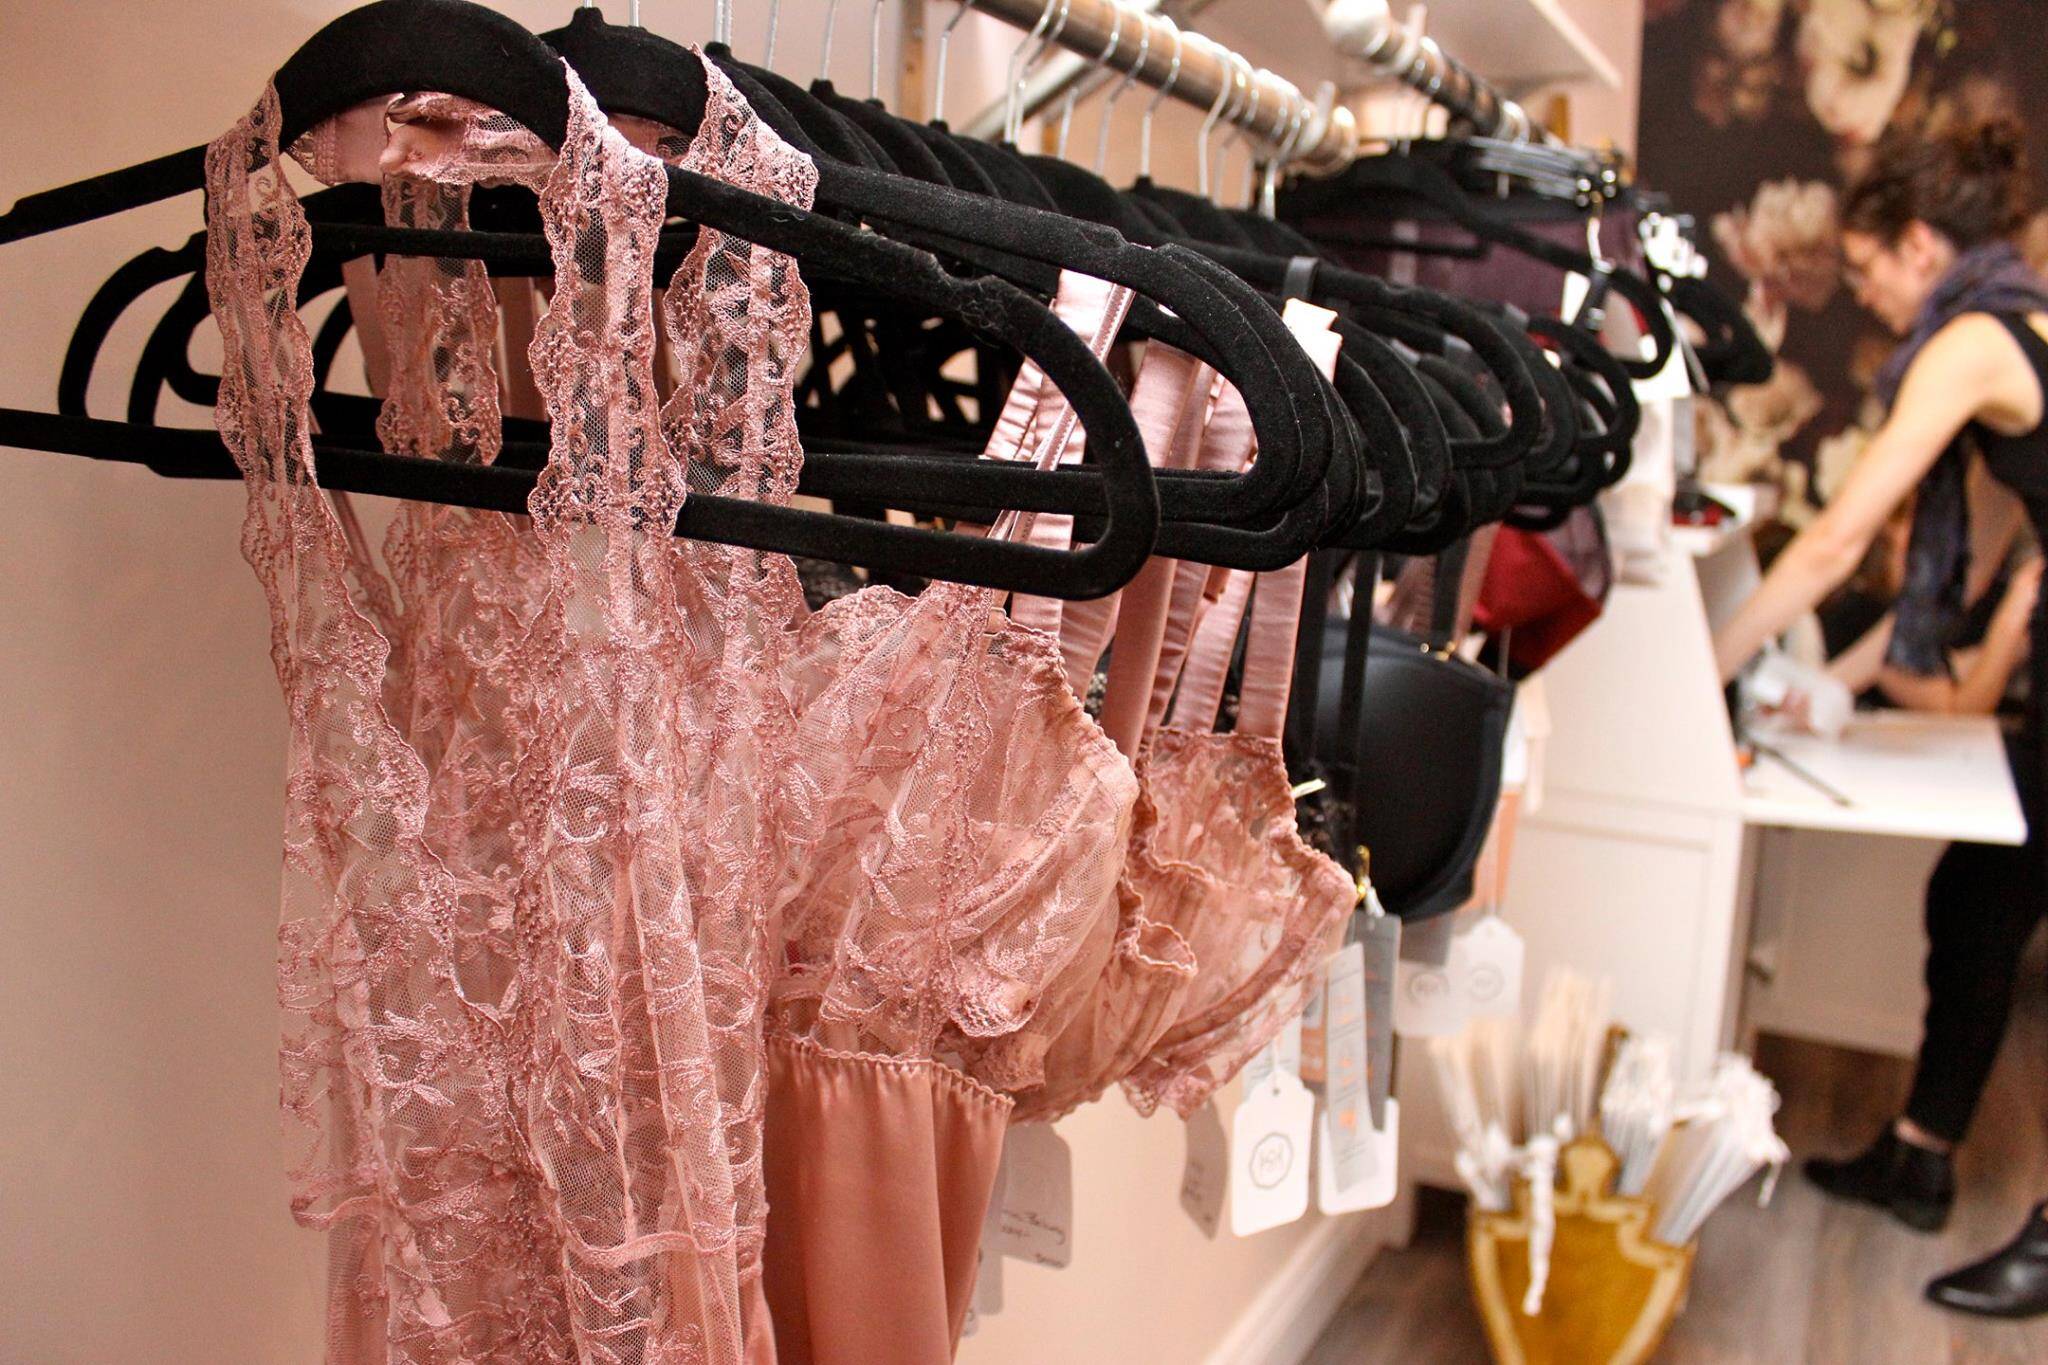 Here's Where Every Shape and Size Can Get the Best Bra Fitting in Toronto -  SavvyMom